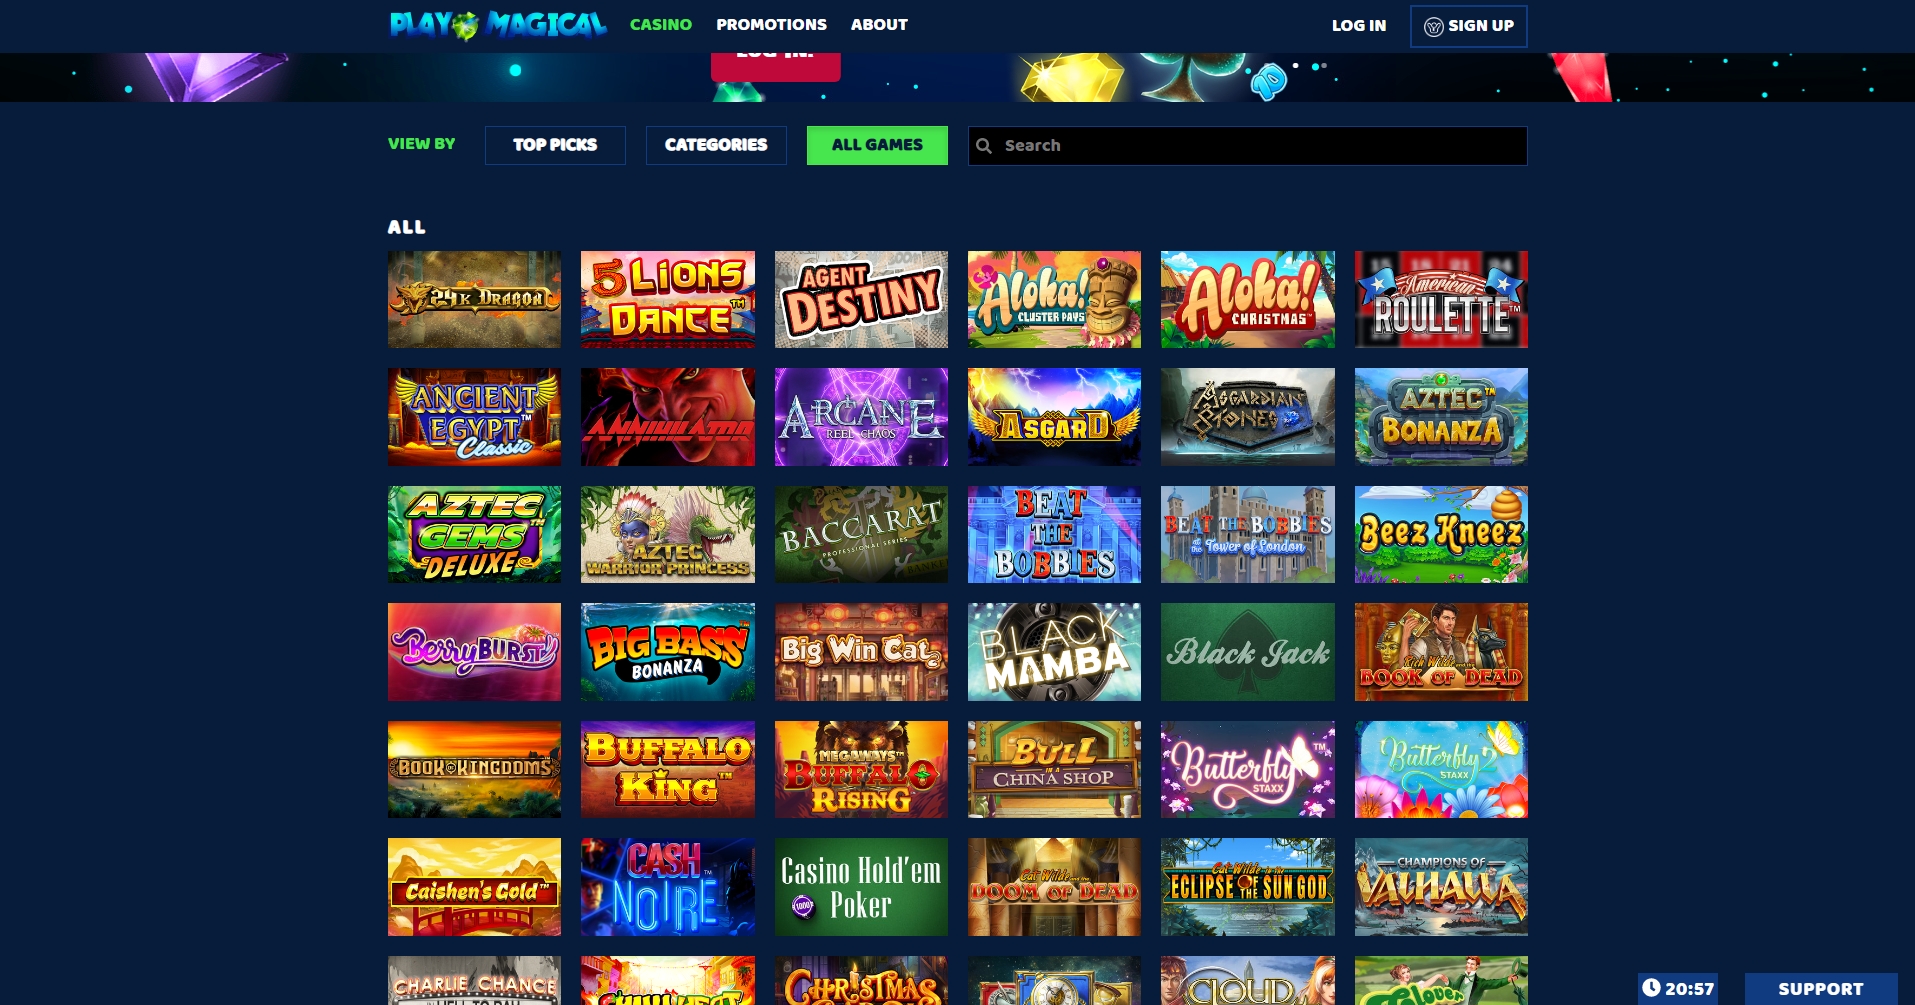 Play Magical Casino Games